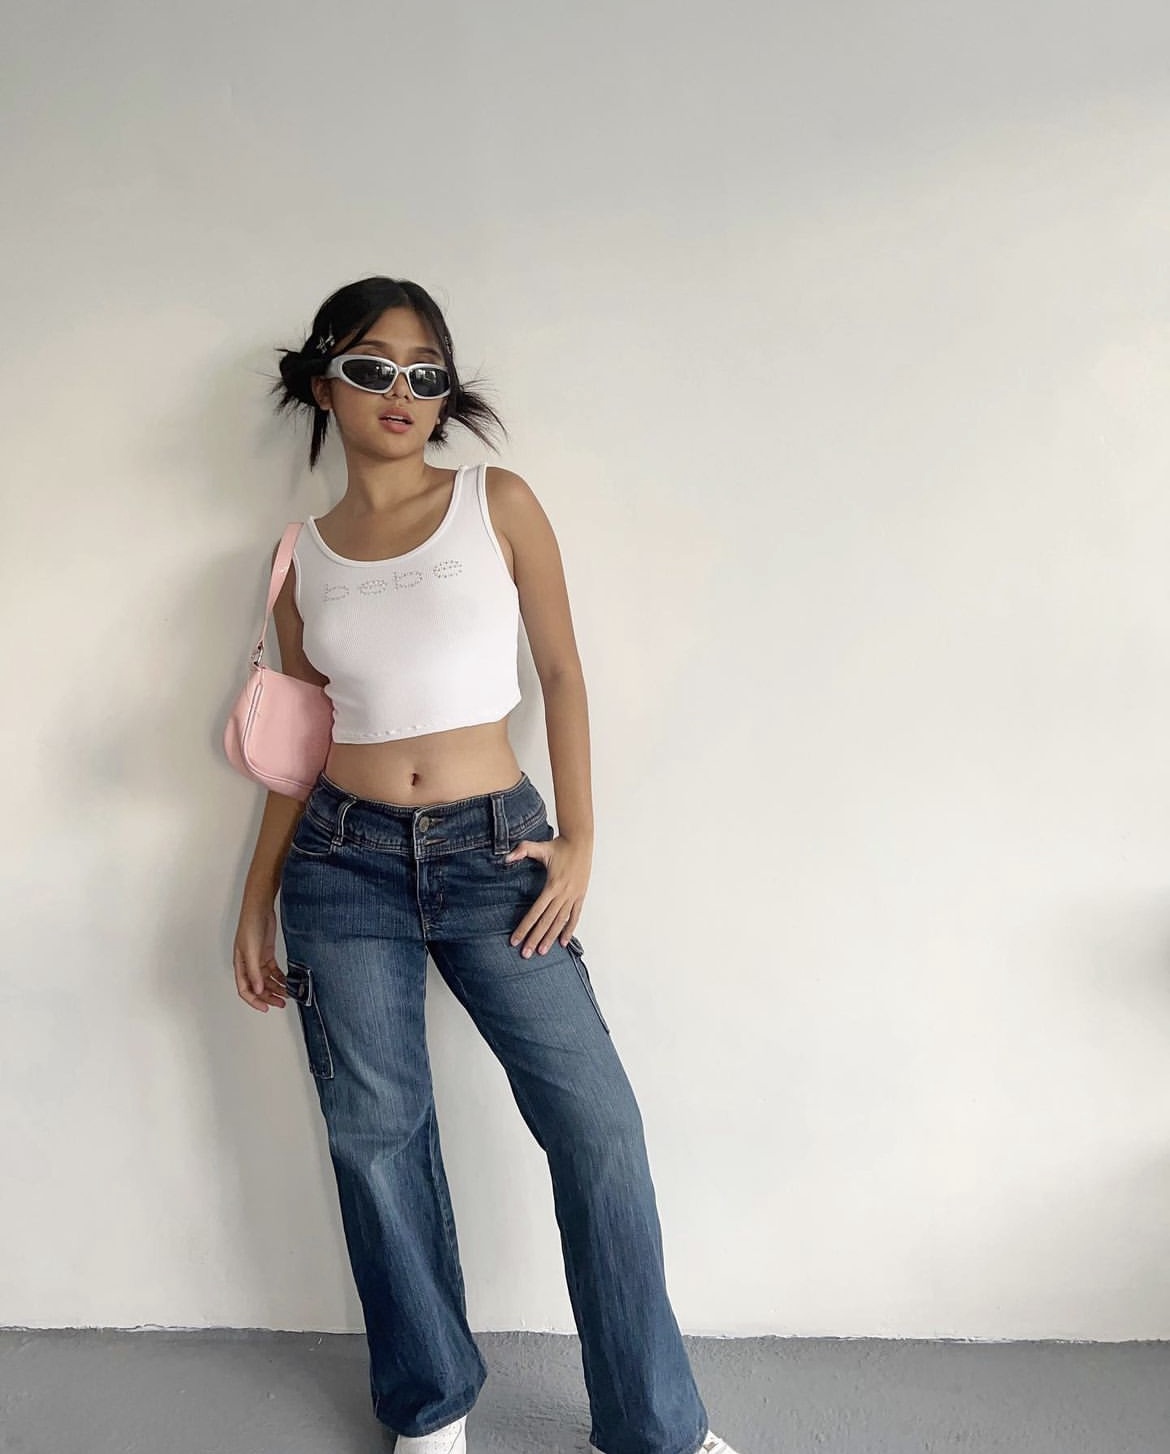 PHOTOS: Influencer-Approved Ways to Wear Low-Waist Jeans